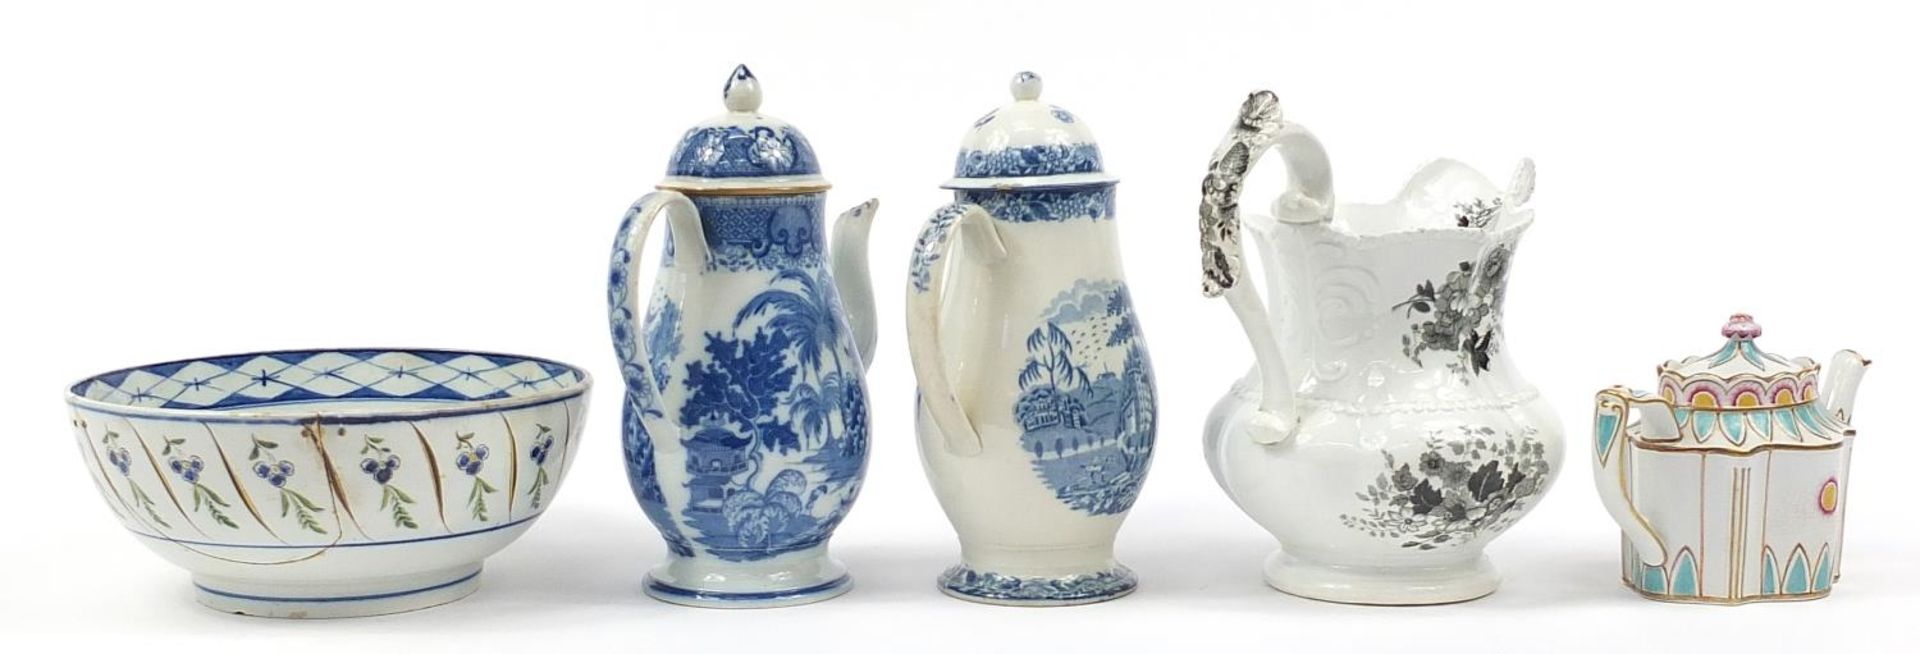 Group of predominantly early 19th century British pottery including two Willow pattern blue and - Image 4 of 5